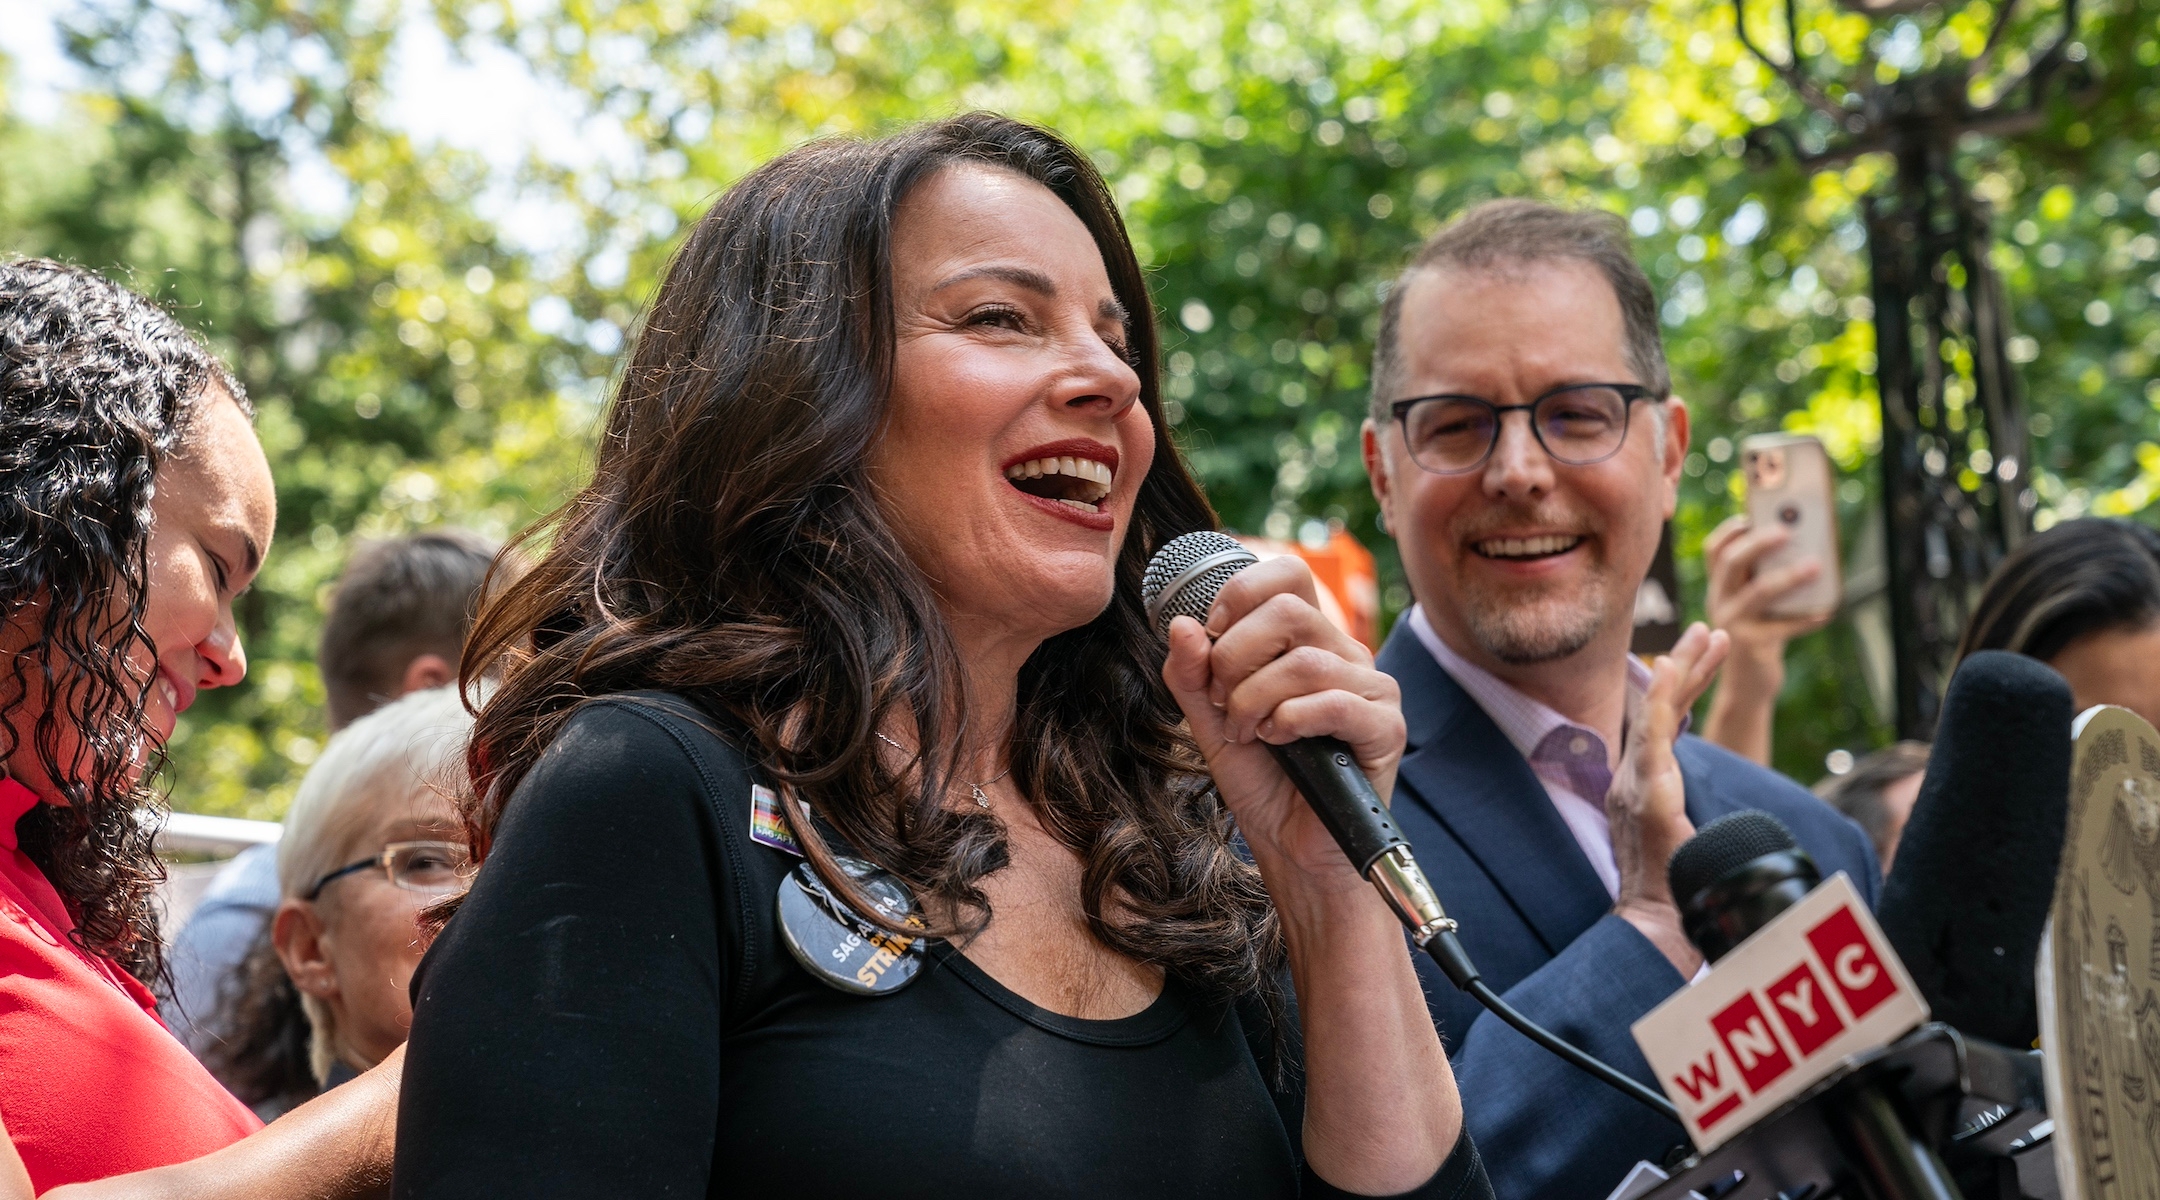 Fran Drescher speaks along with Manhattan Borough President Mark Levine at a SAG-AFTRA rally in New York City, Aug. 1, 2023. (Lev Radin/Pacific Press/LightRocket via Getty Images)